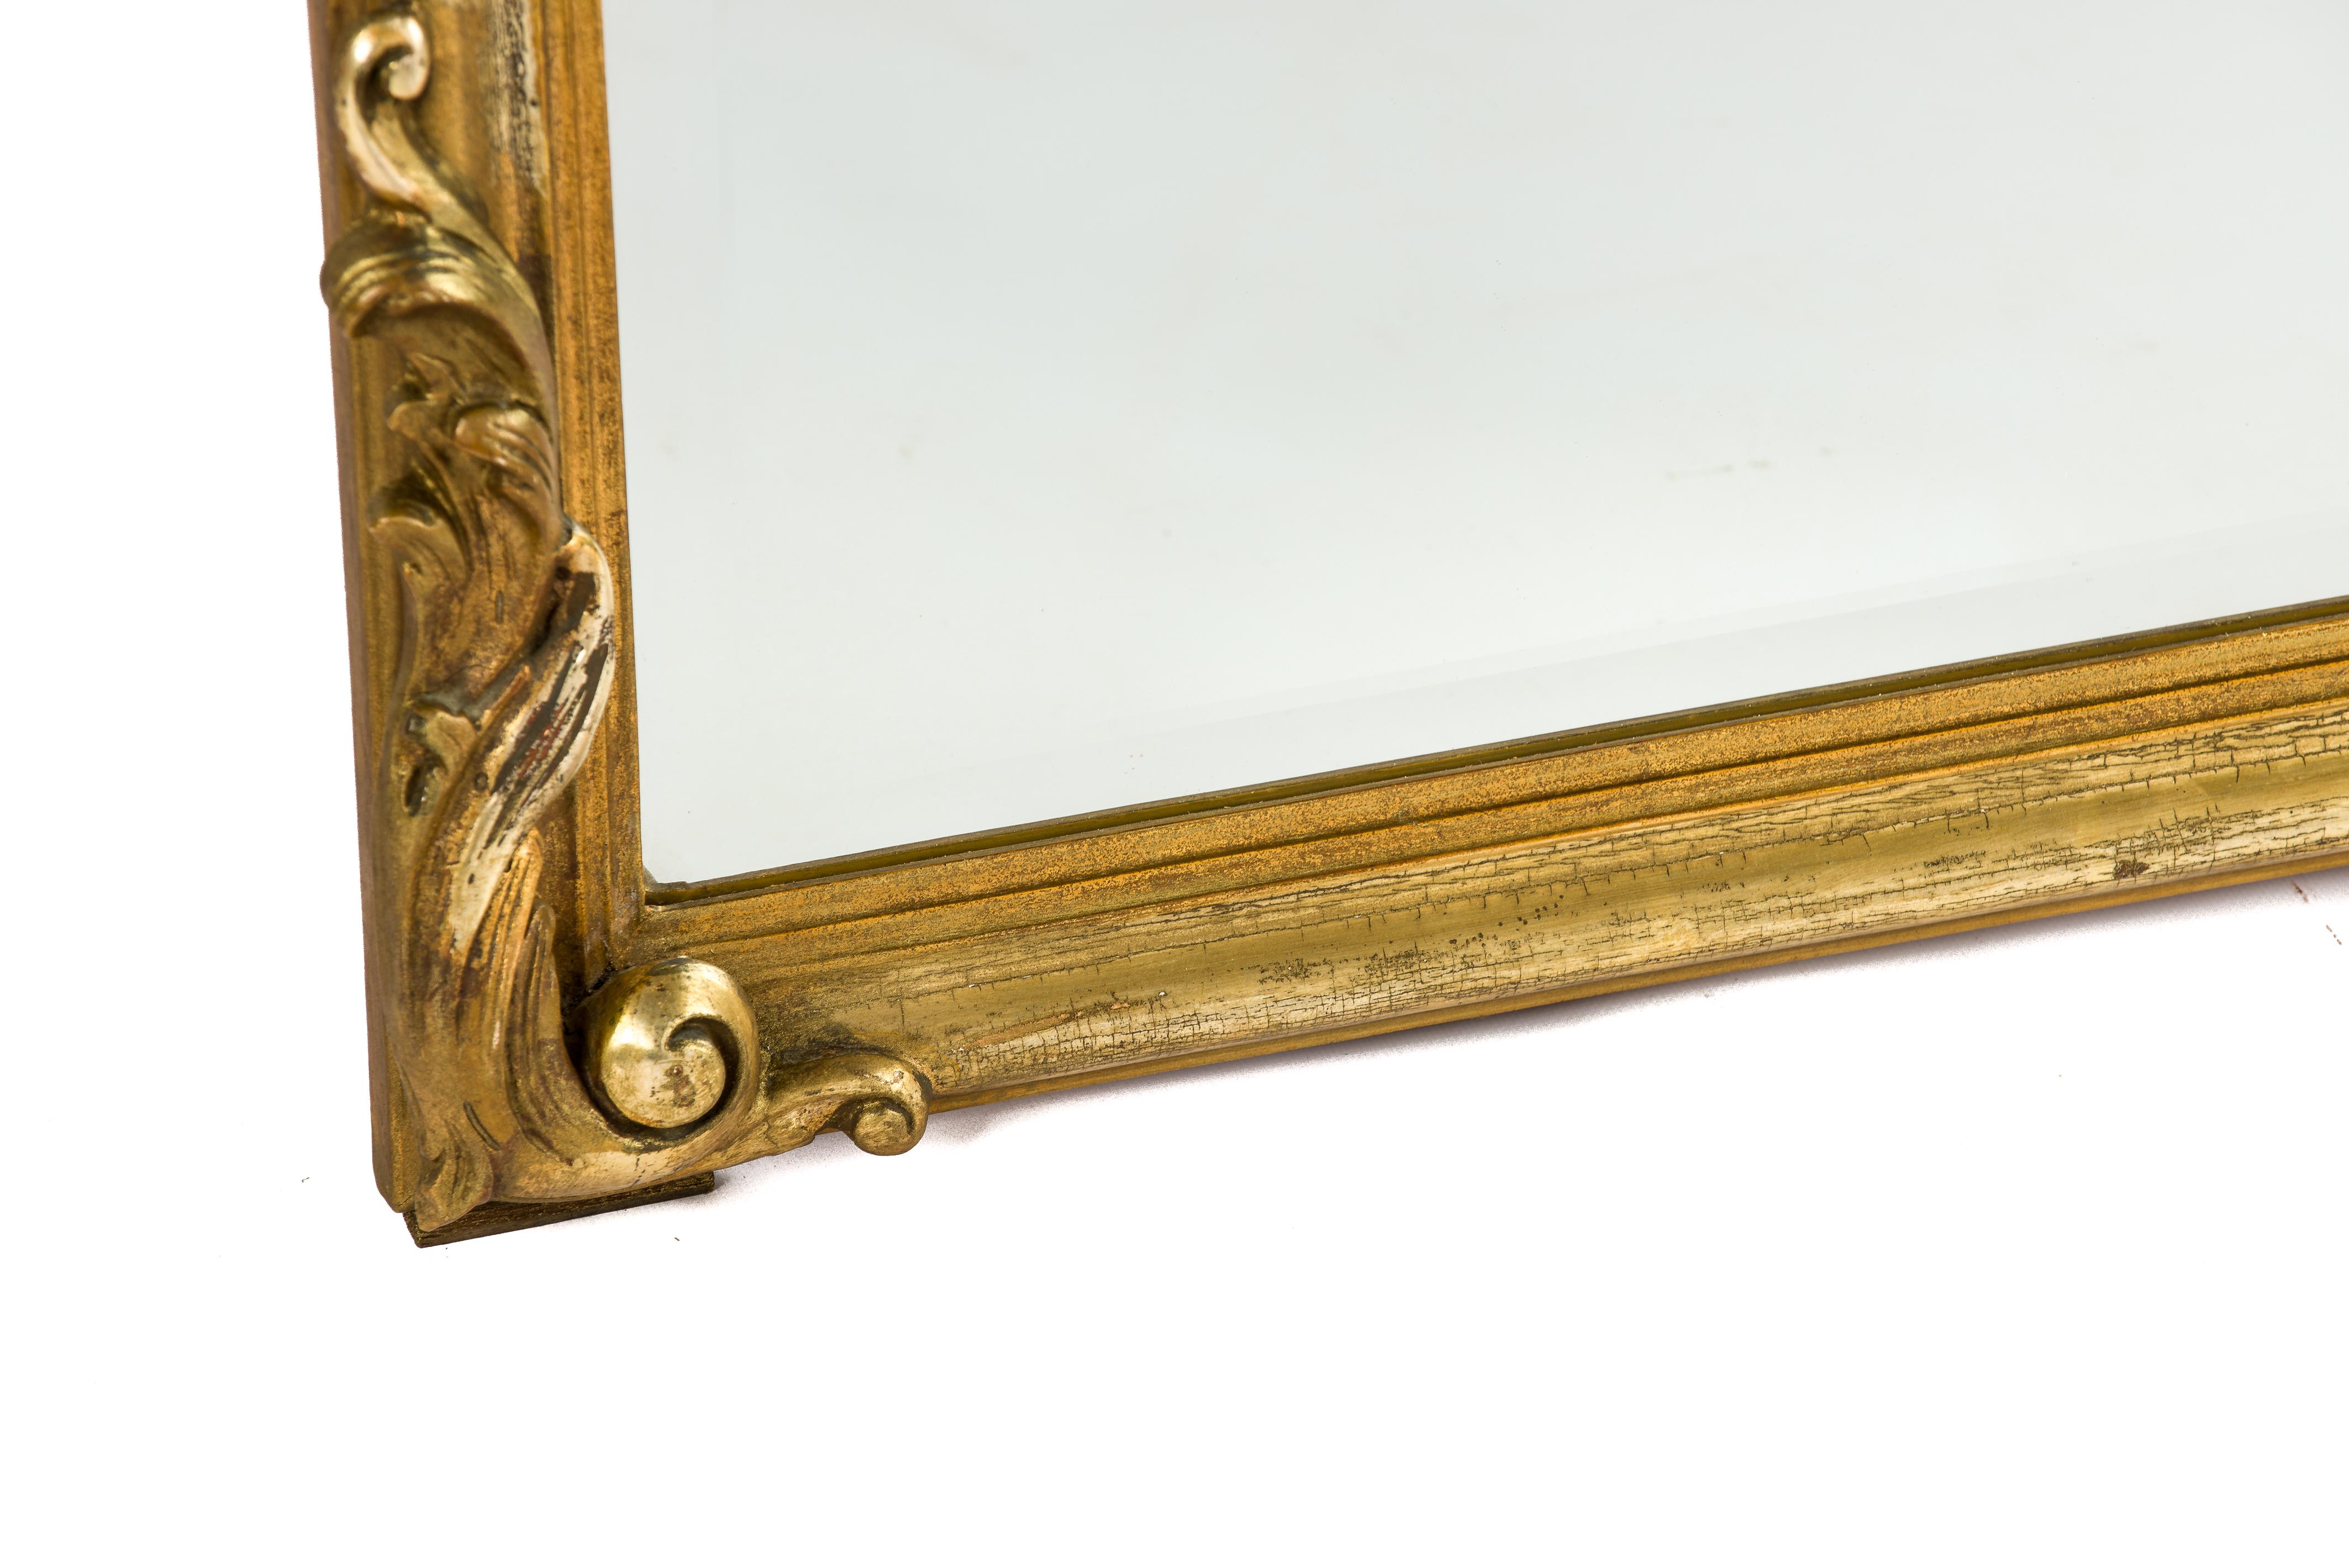 Antique 19th century French Louis Quinze Gold Gilt Mirror with Facetted Glass In Good Condition For Sale In Casteren, NL